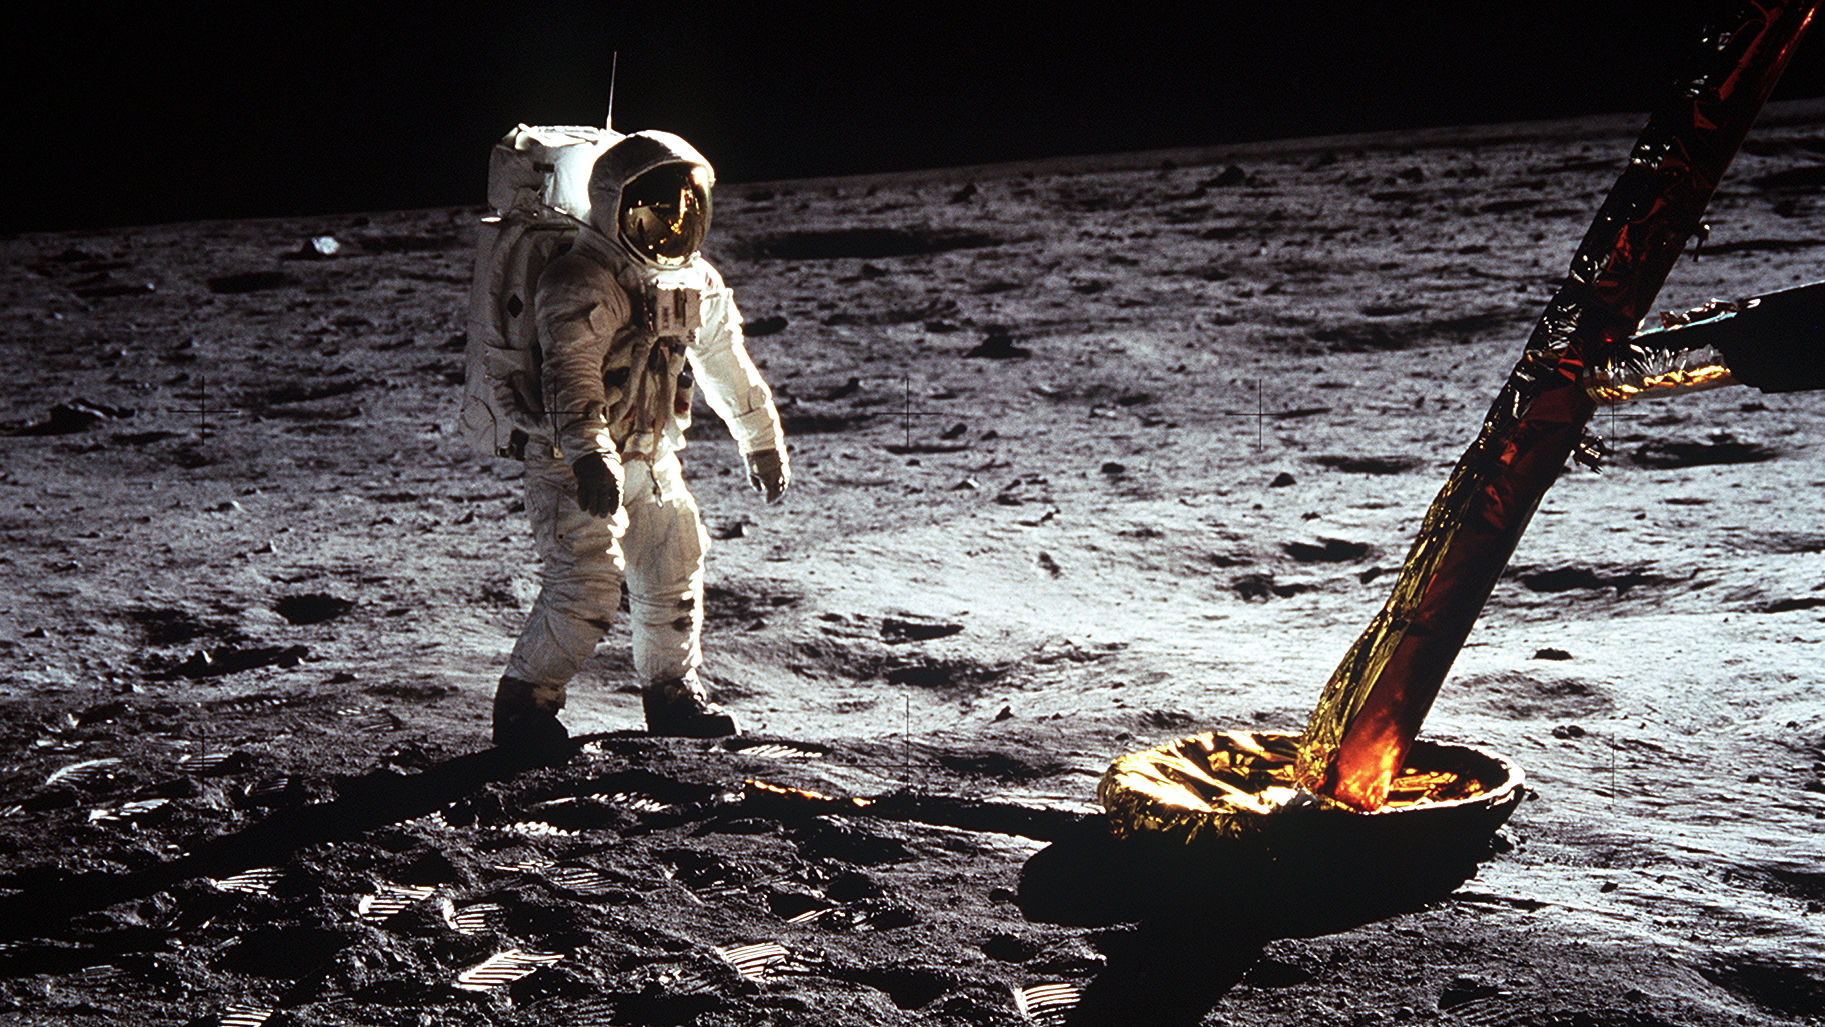 5 Terrifying Moments During the Apollo 11 Moon Landing Mission